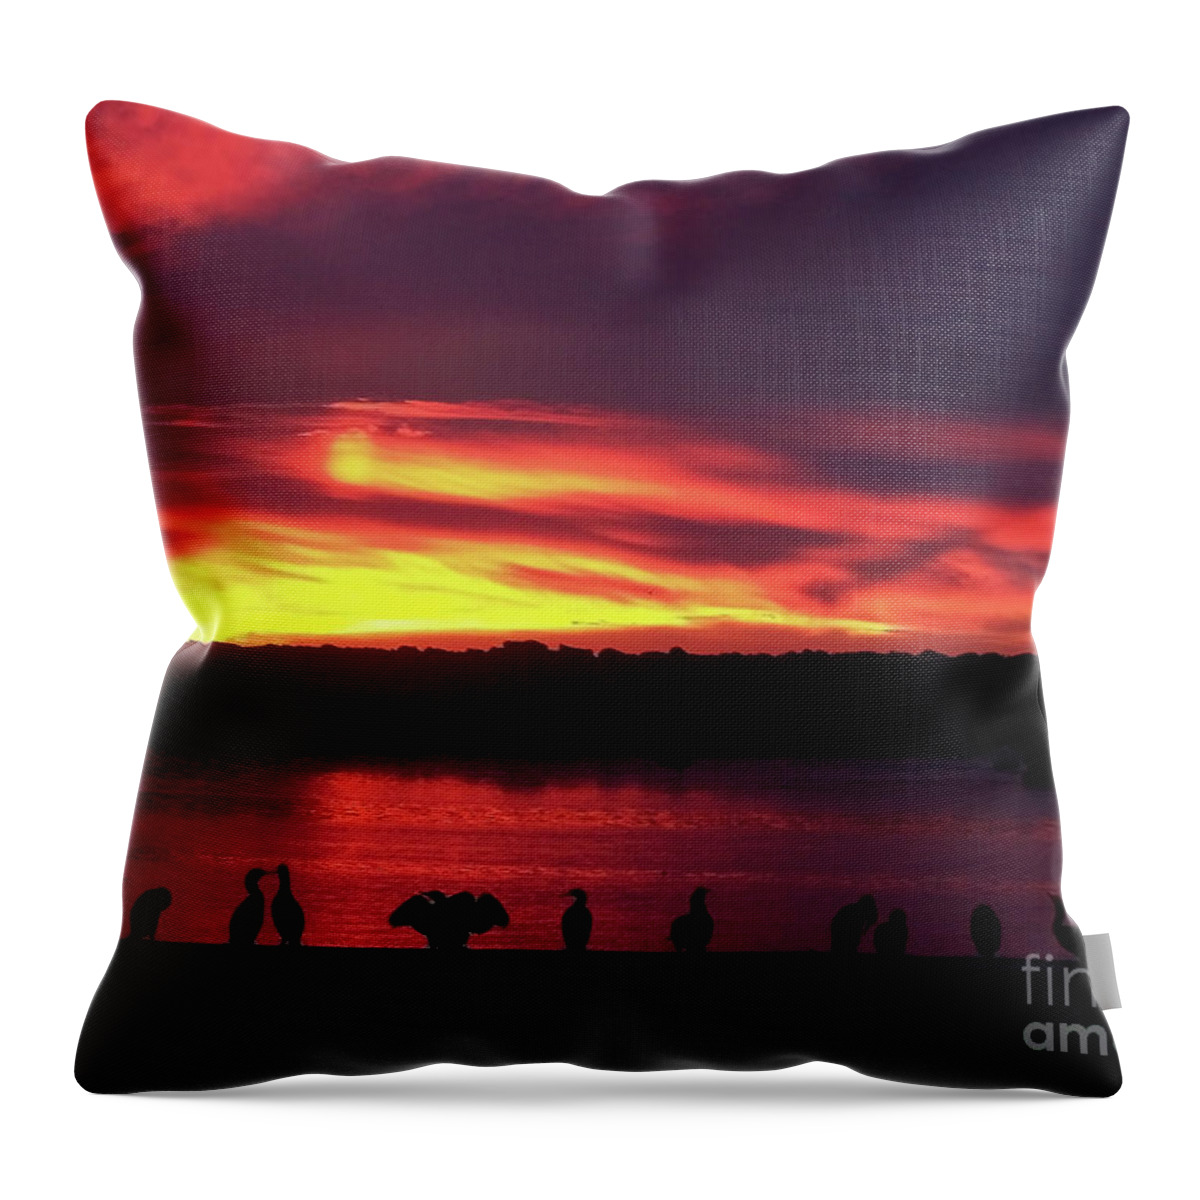 California Dreaming Throw Pillow featuring the photograph California Dreaming by Jennifer Robin